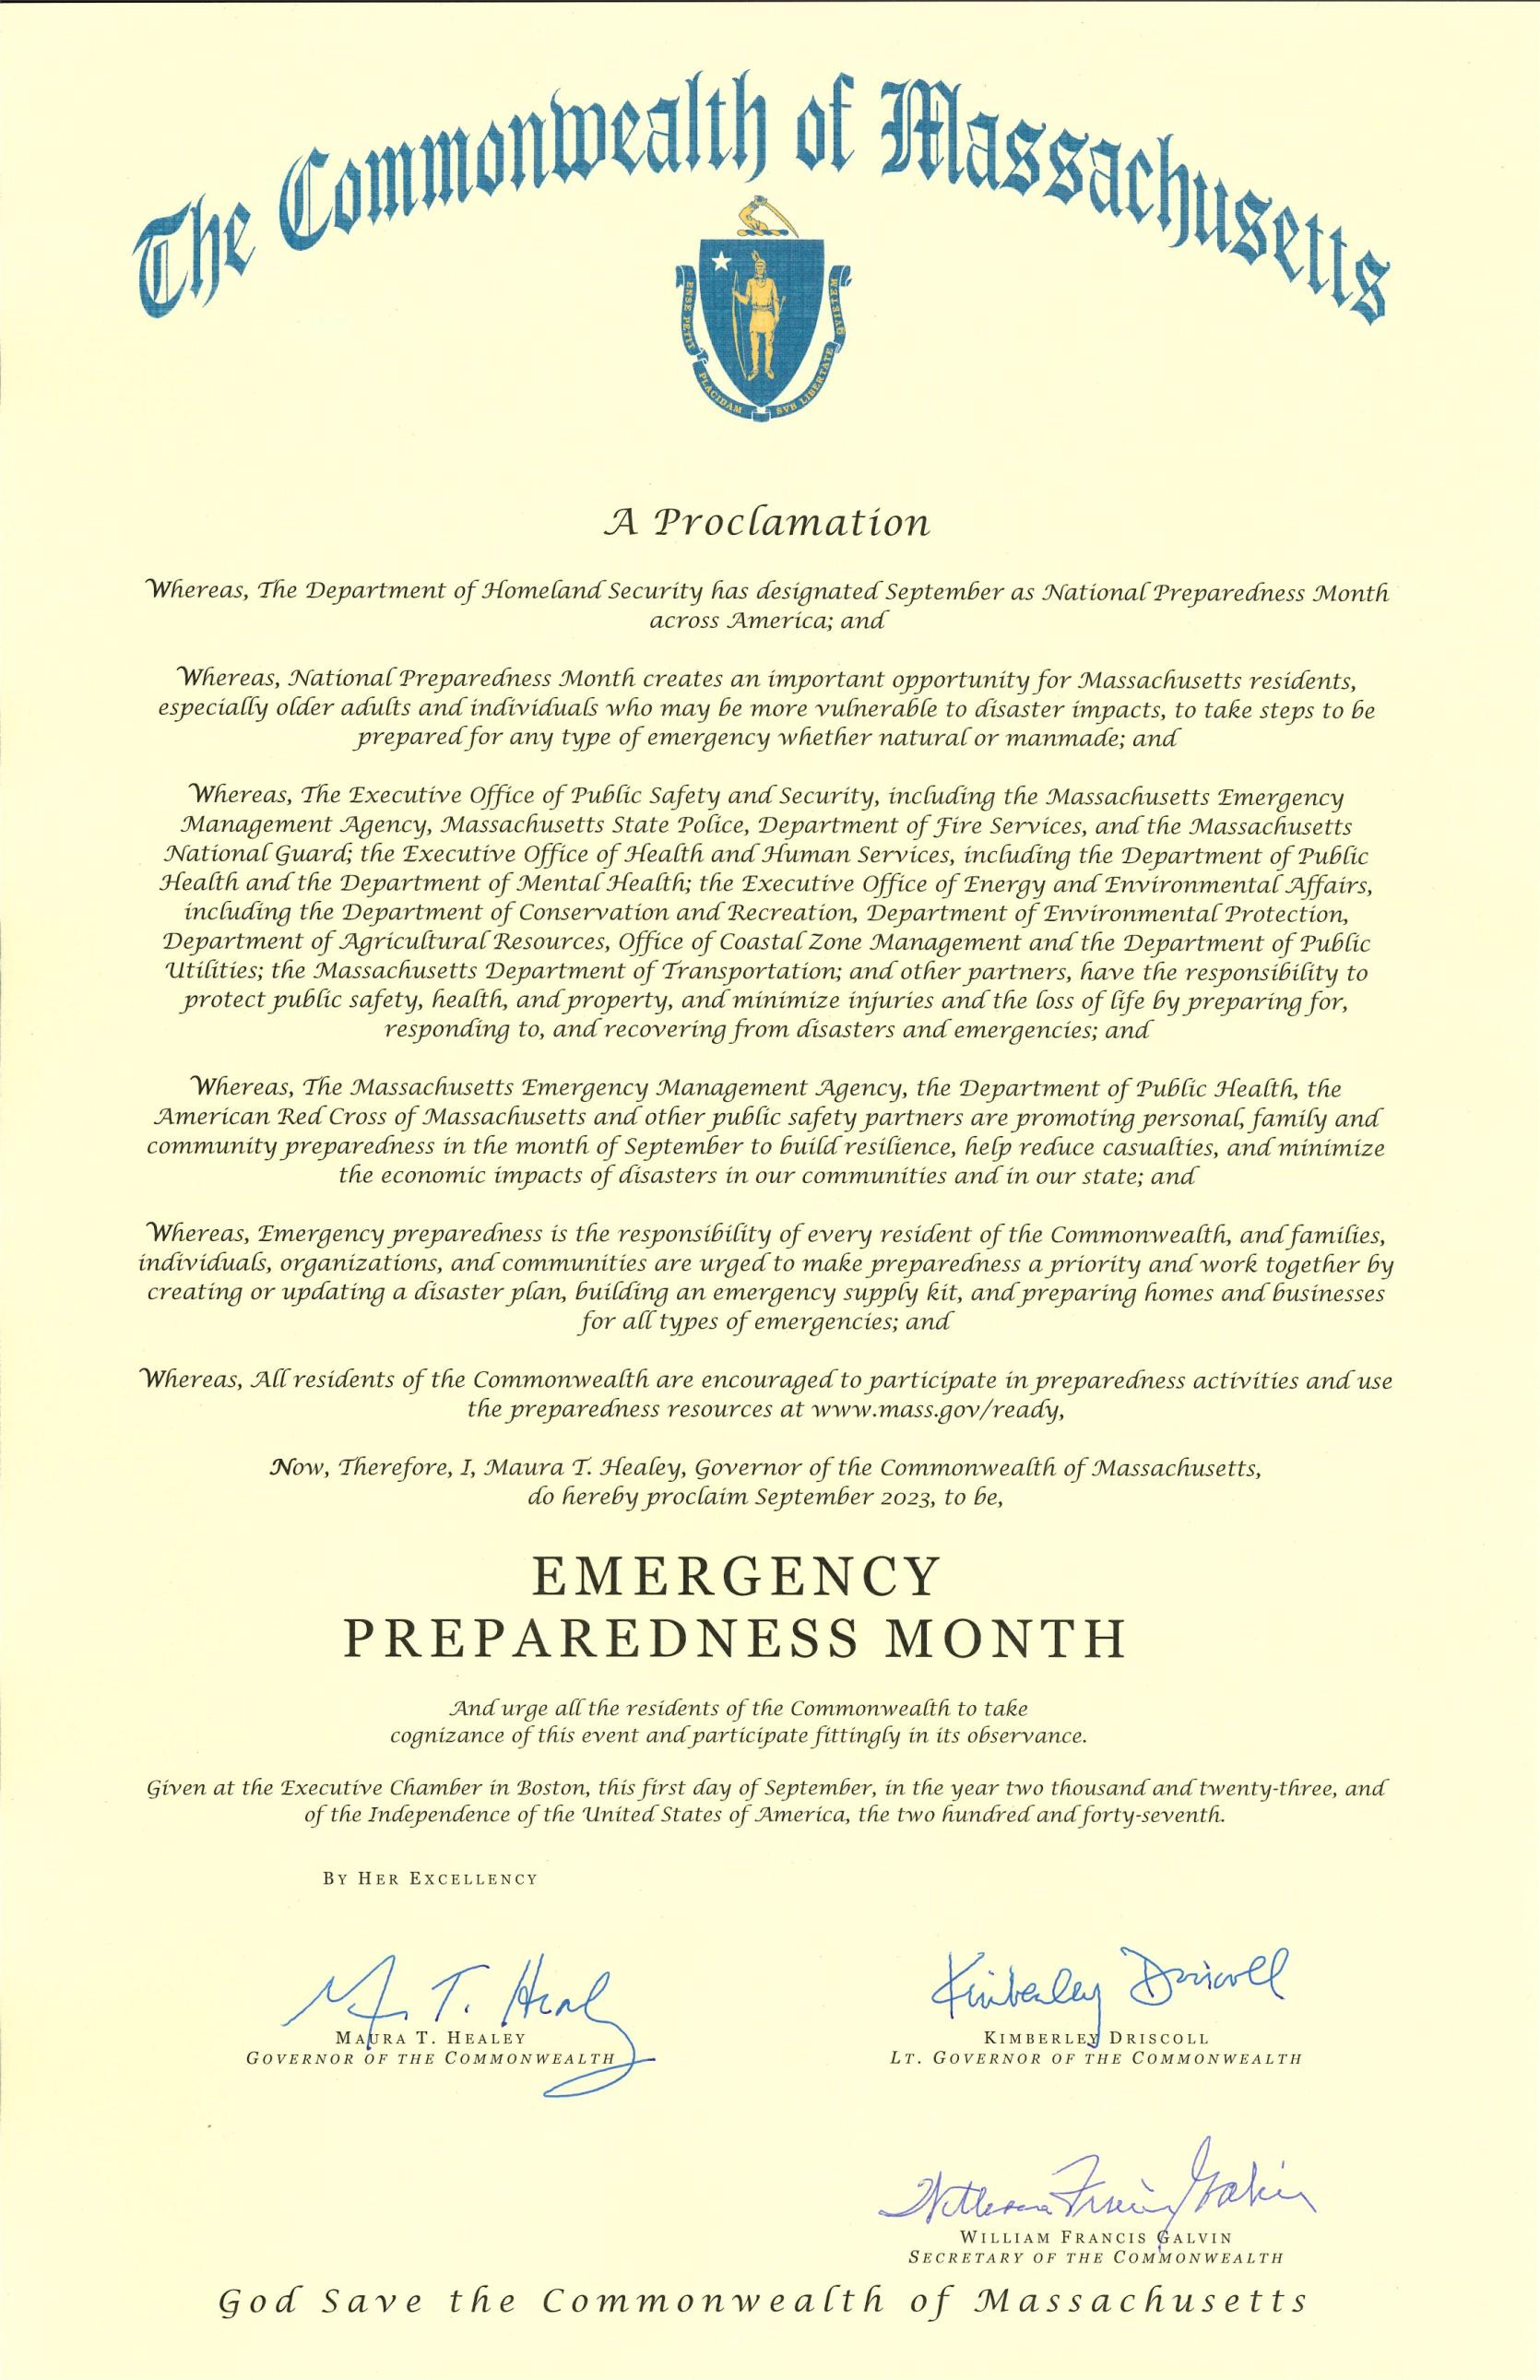 Governor's Proclamation of Emergency Preparedness Month during September 2023